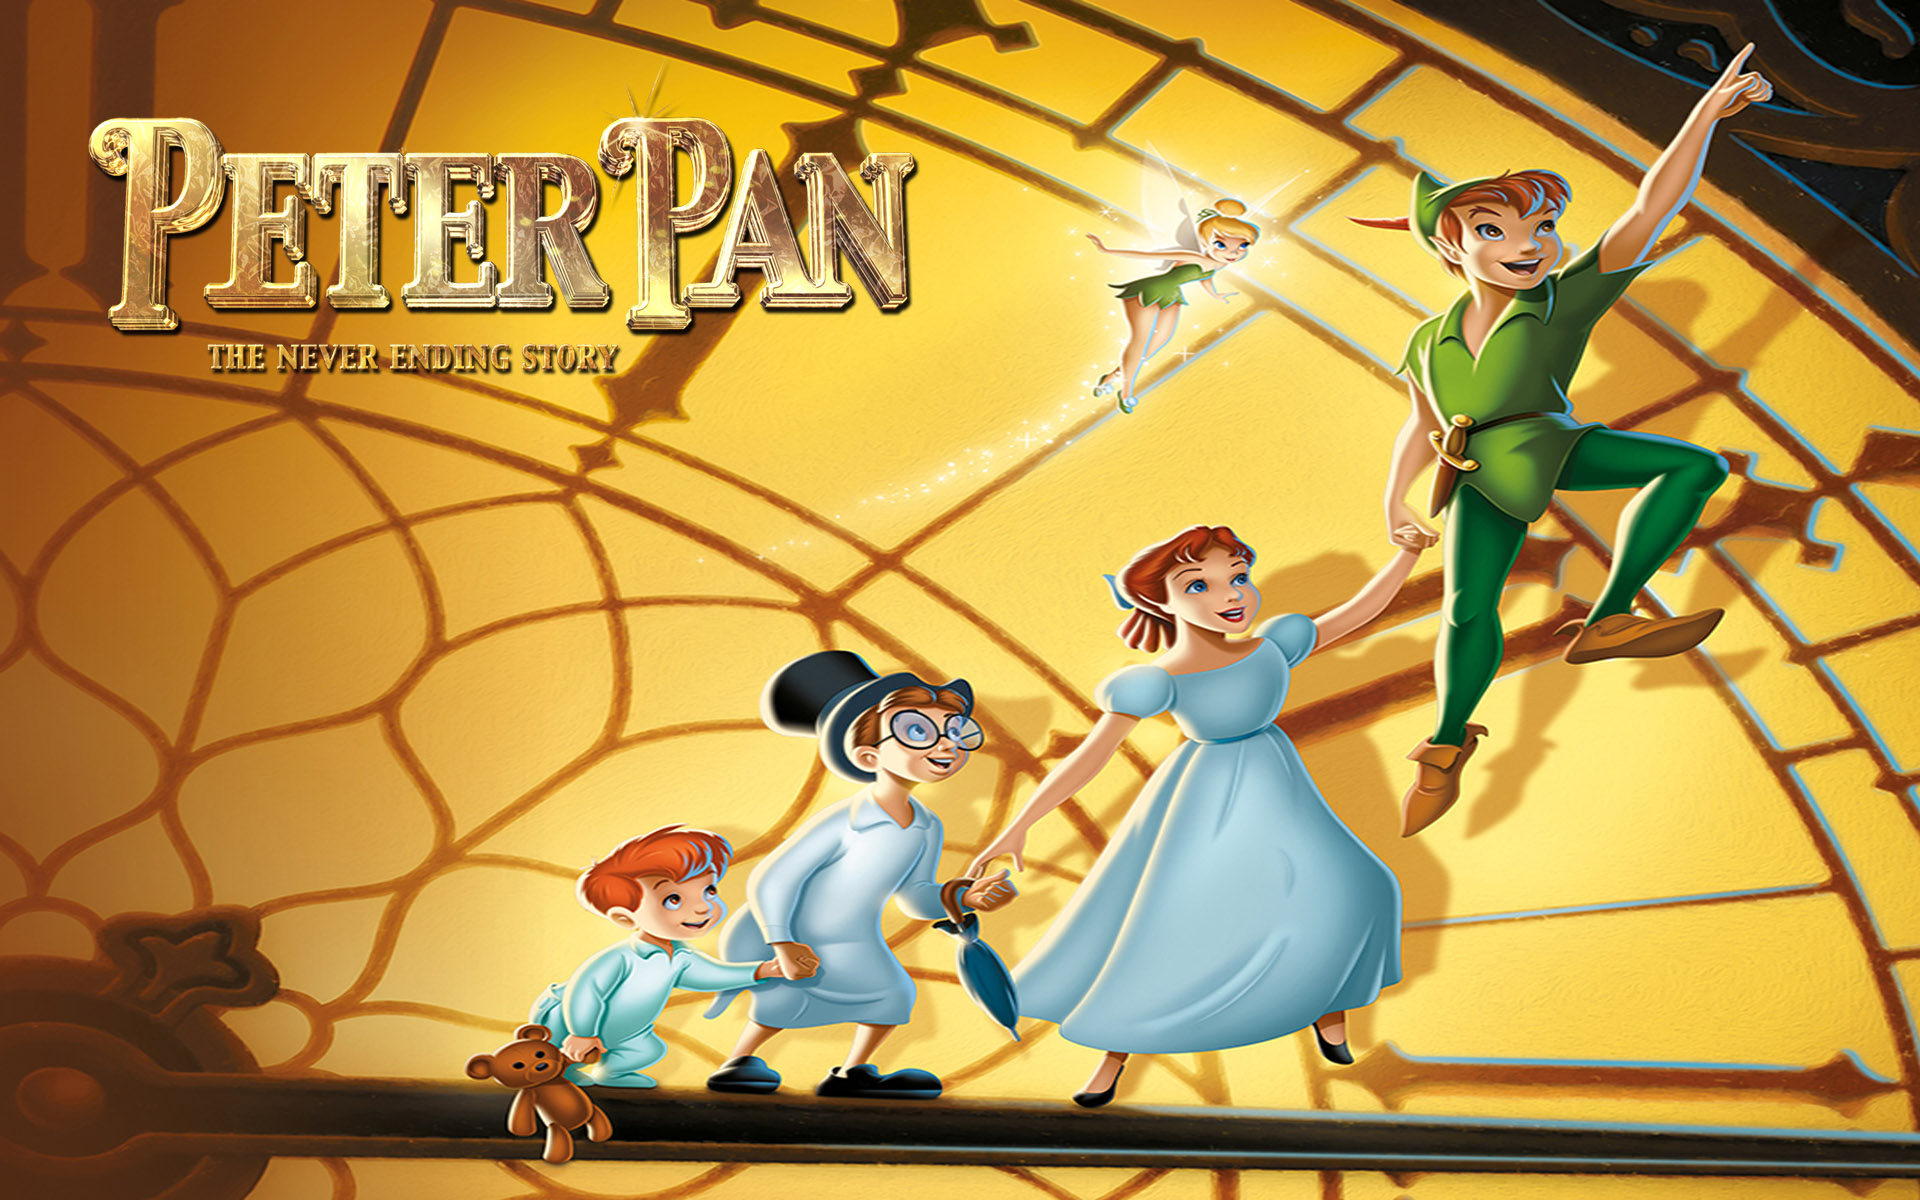 Revisiting Never Land: Celebrating 65 Years of Peter Pan